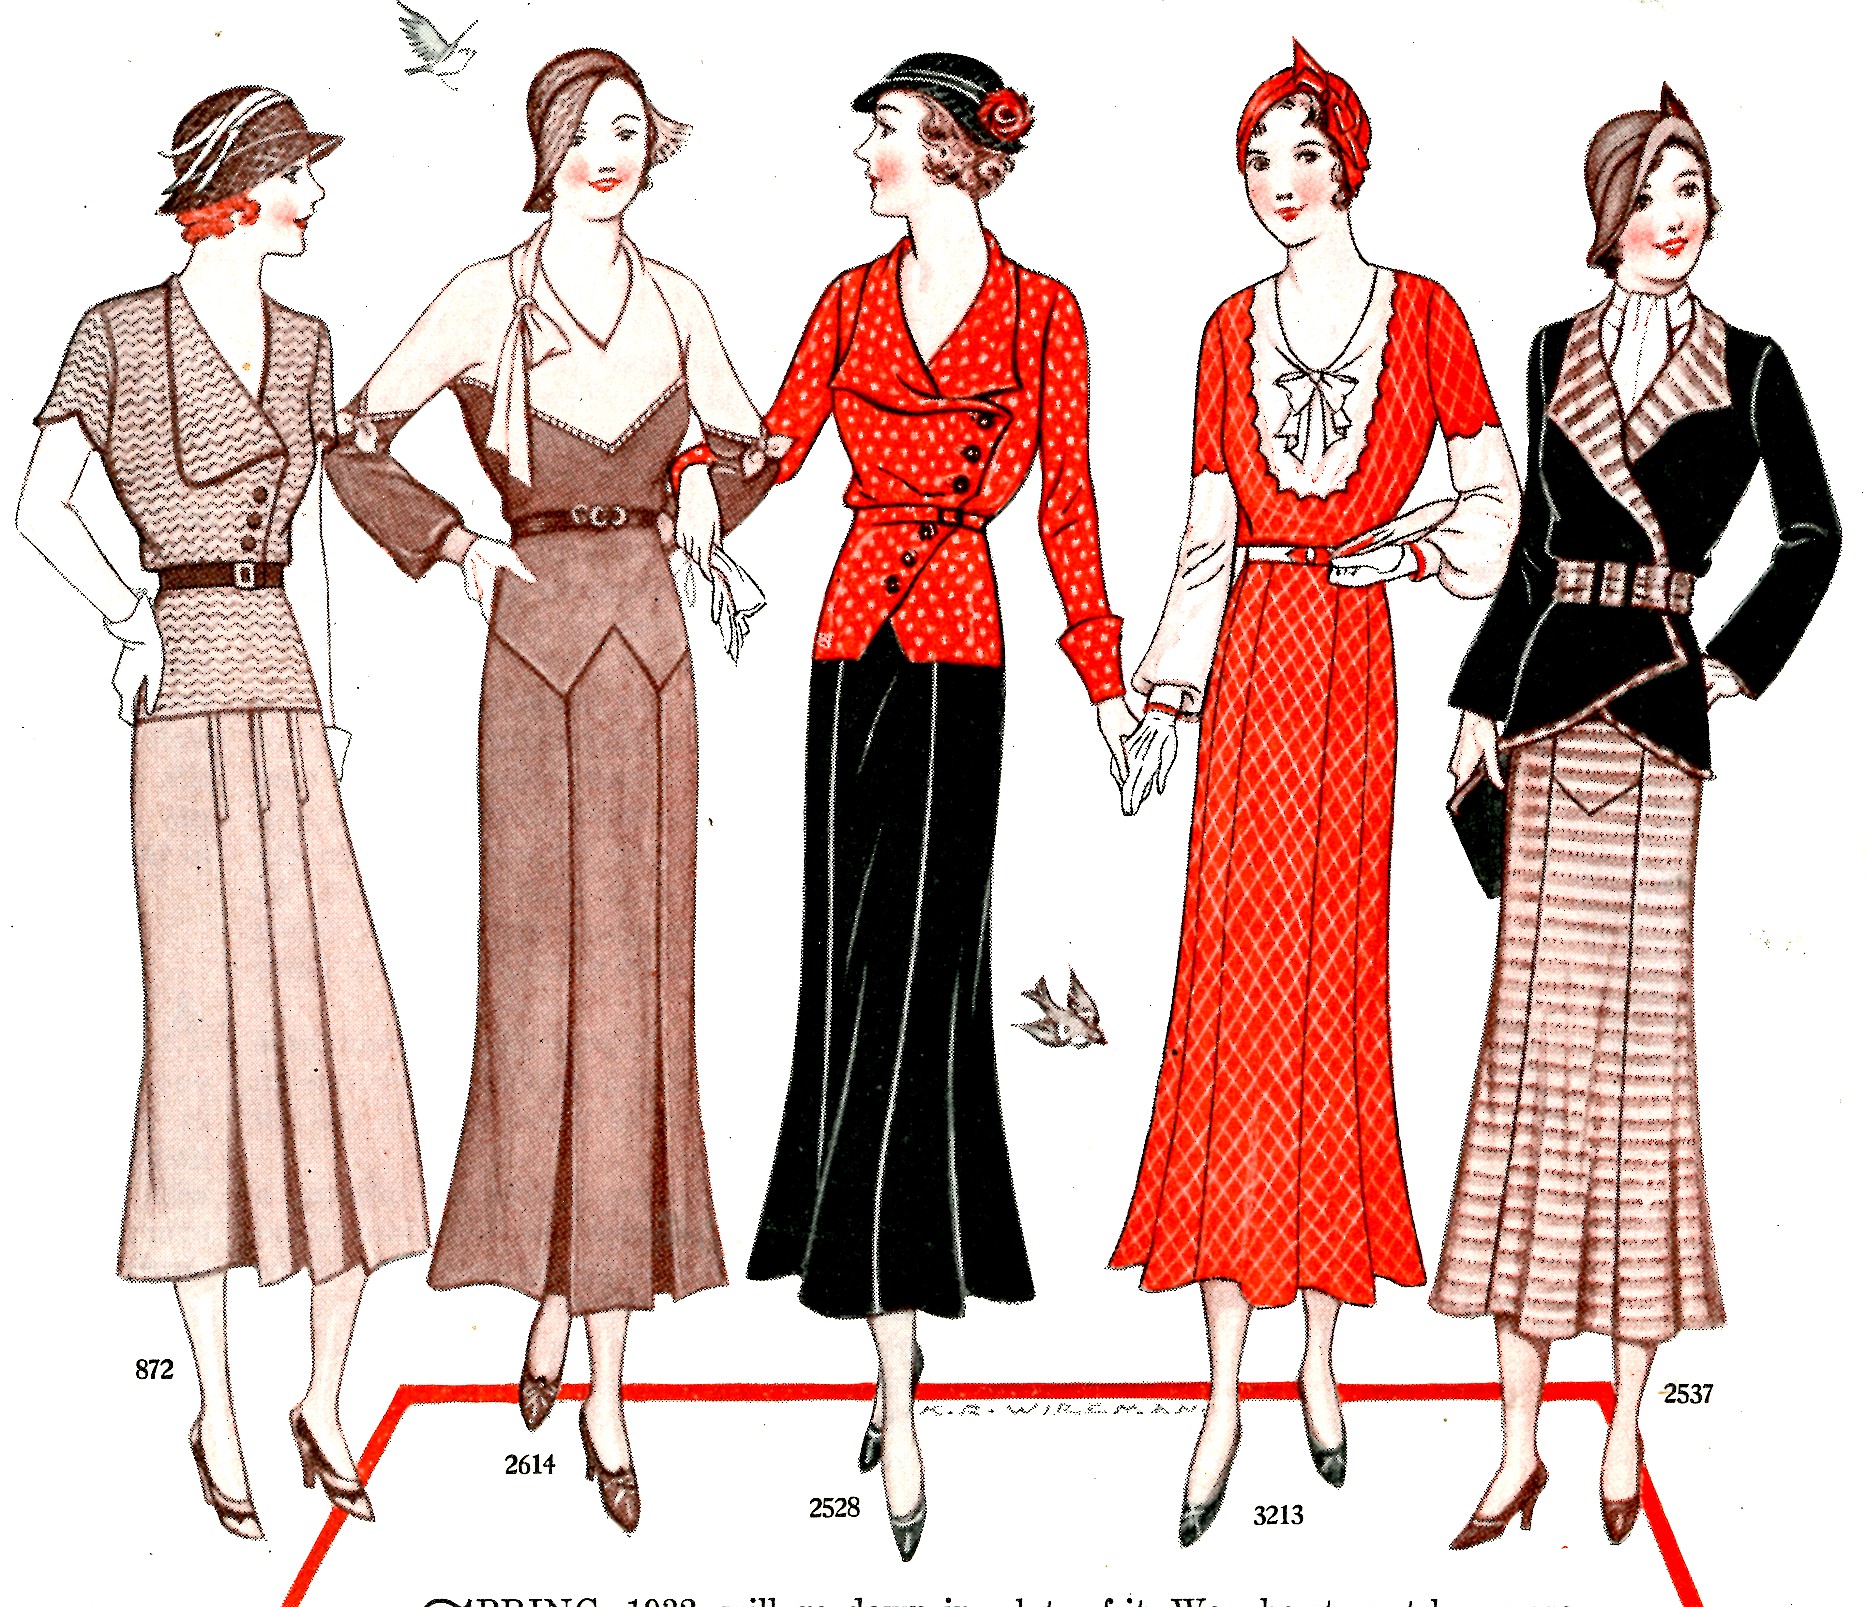 a vintage pattern of ladies's dresses and blouses